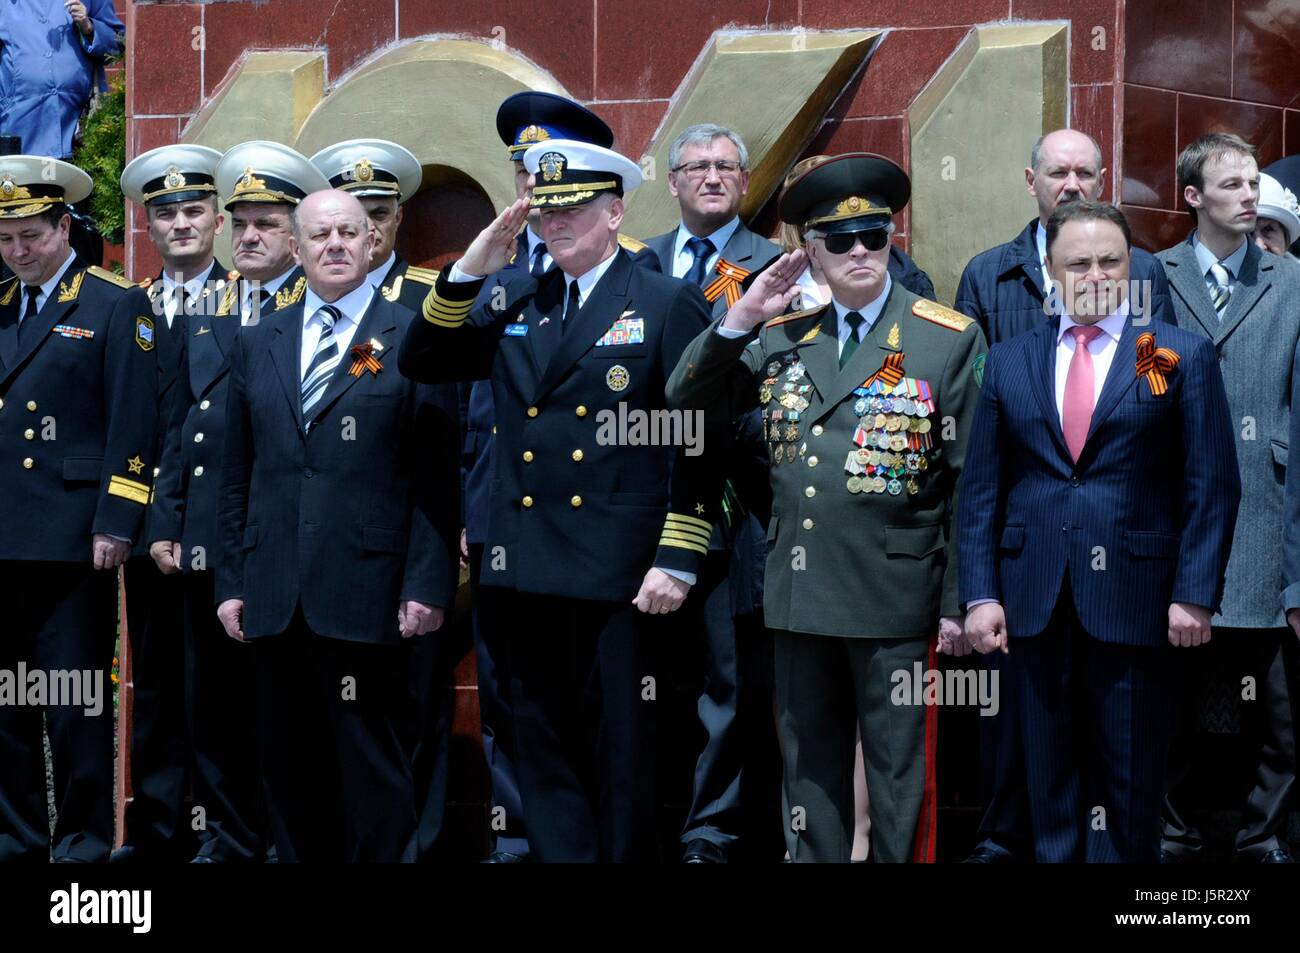 U.S. Navy Commanding Officer Rudy Lupton (center) salutes a Russian Navy band as they pass by the Battle of Glory of the Russian Federation Pacific Fleet Memorial during a ceremony May 8, 2010 in Vladivostok, Russia. The commemoration ceremony marked the 65th anniversary of Victory Day, a national Russian holiday celebrating the end of World War II.    (photo by Cynthia Griggs /US Navy  via Planetpix) Stock Photo